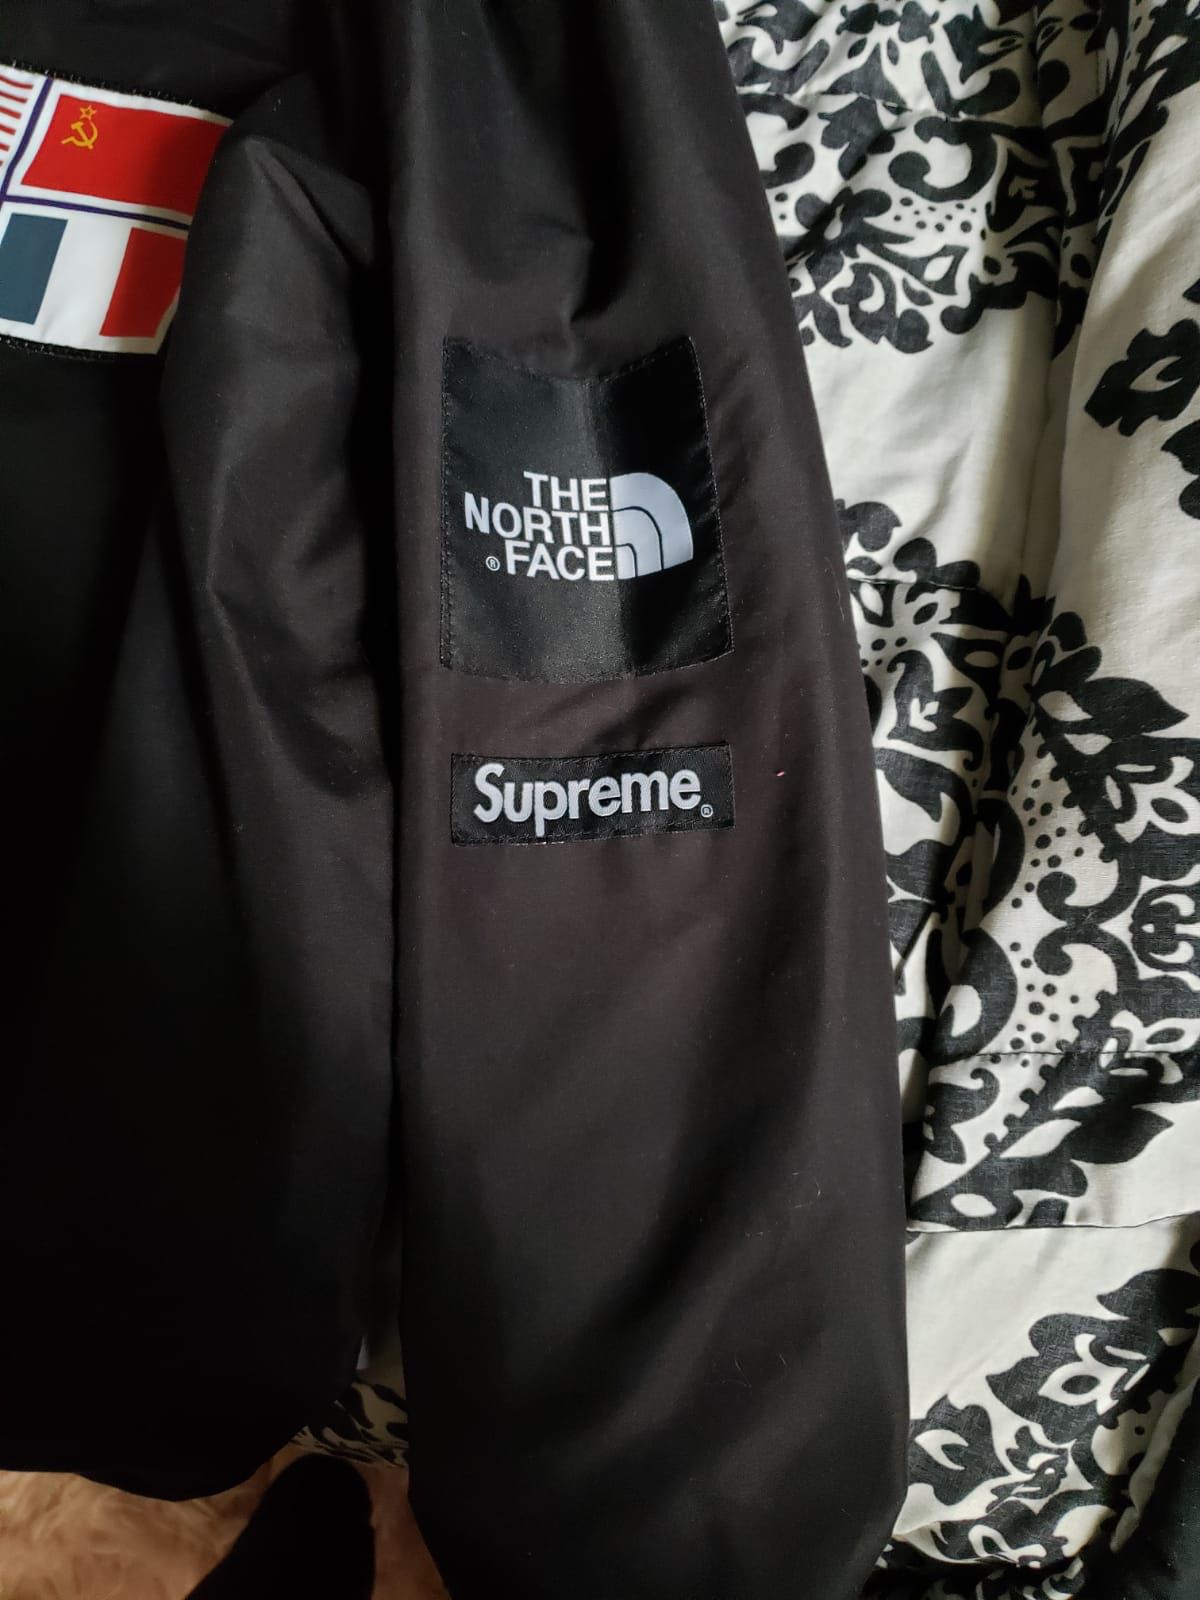 Supreme x north face limited edition jacket